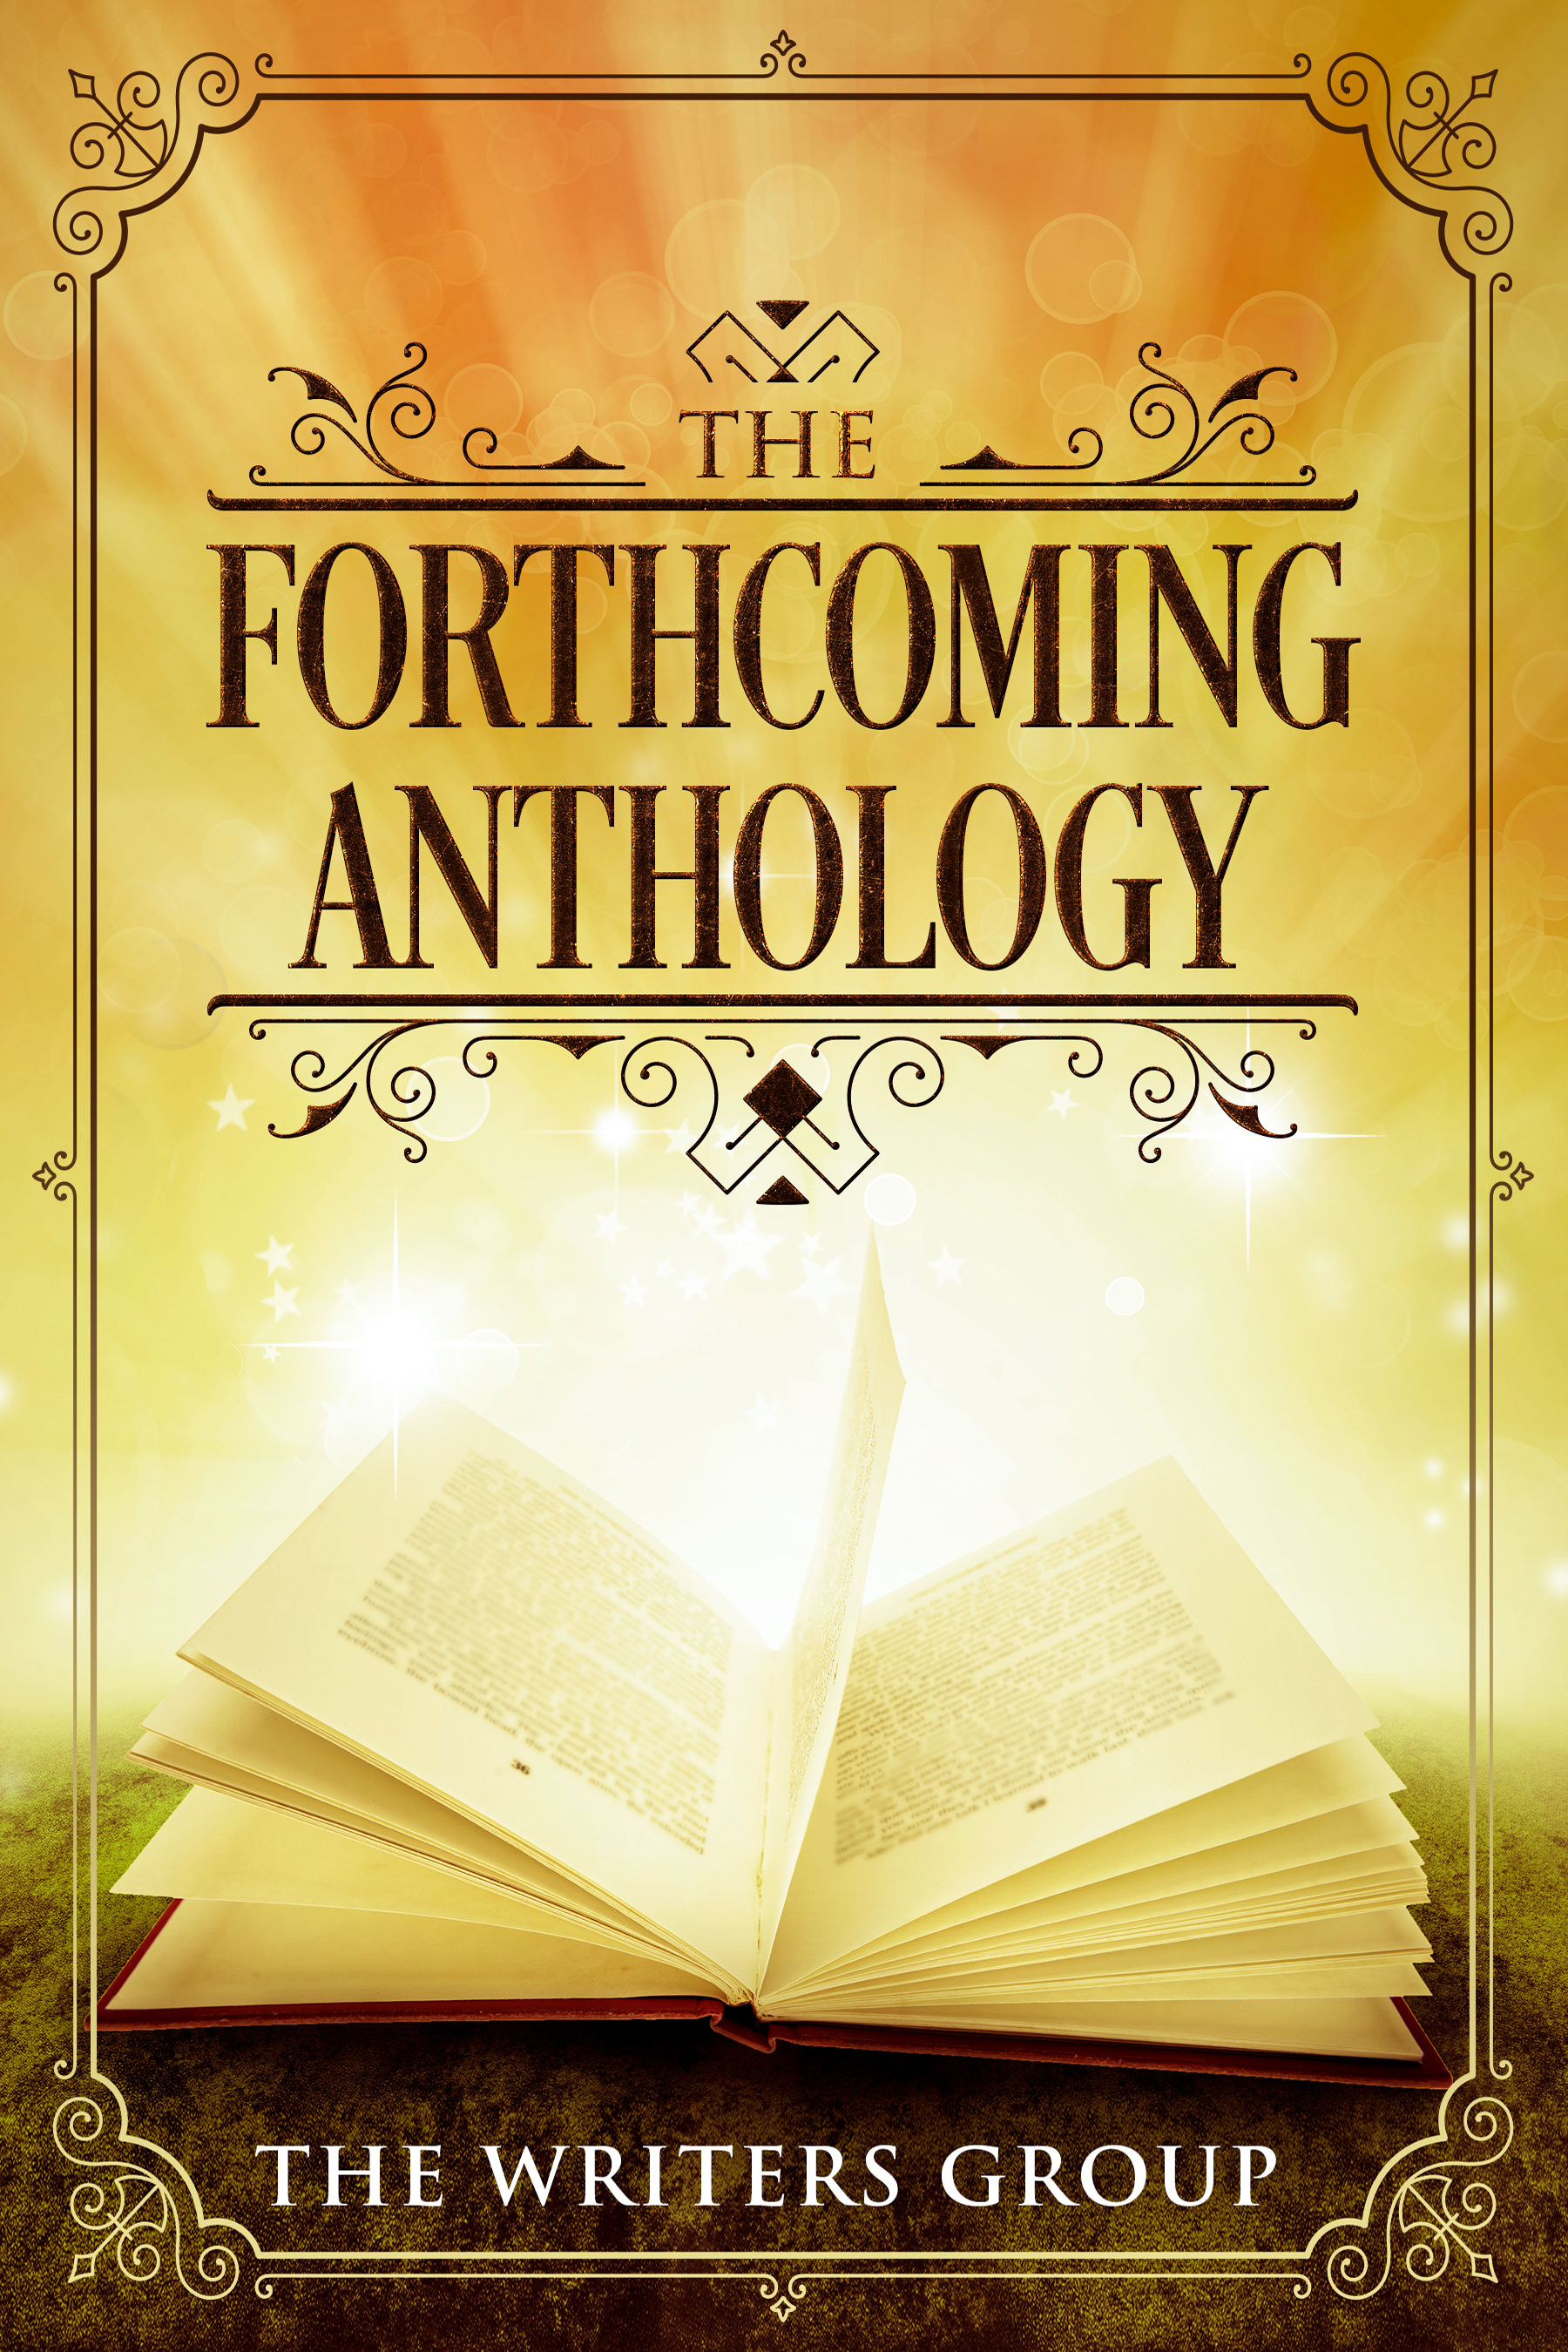 The Writers Group Releases Their Fourth Anthology Book “The Forth Coming”